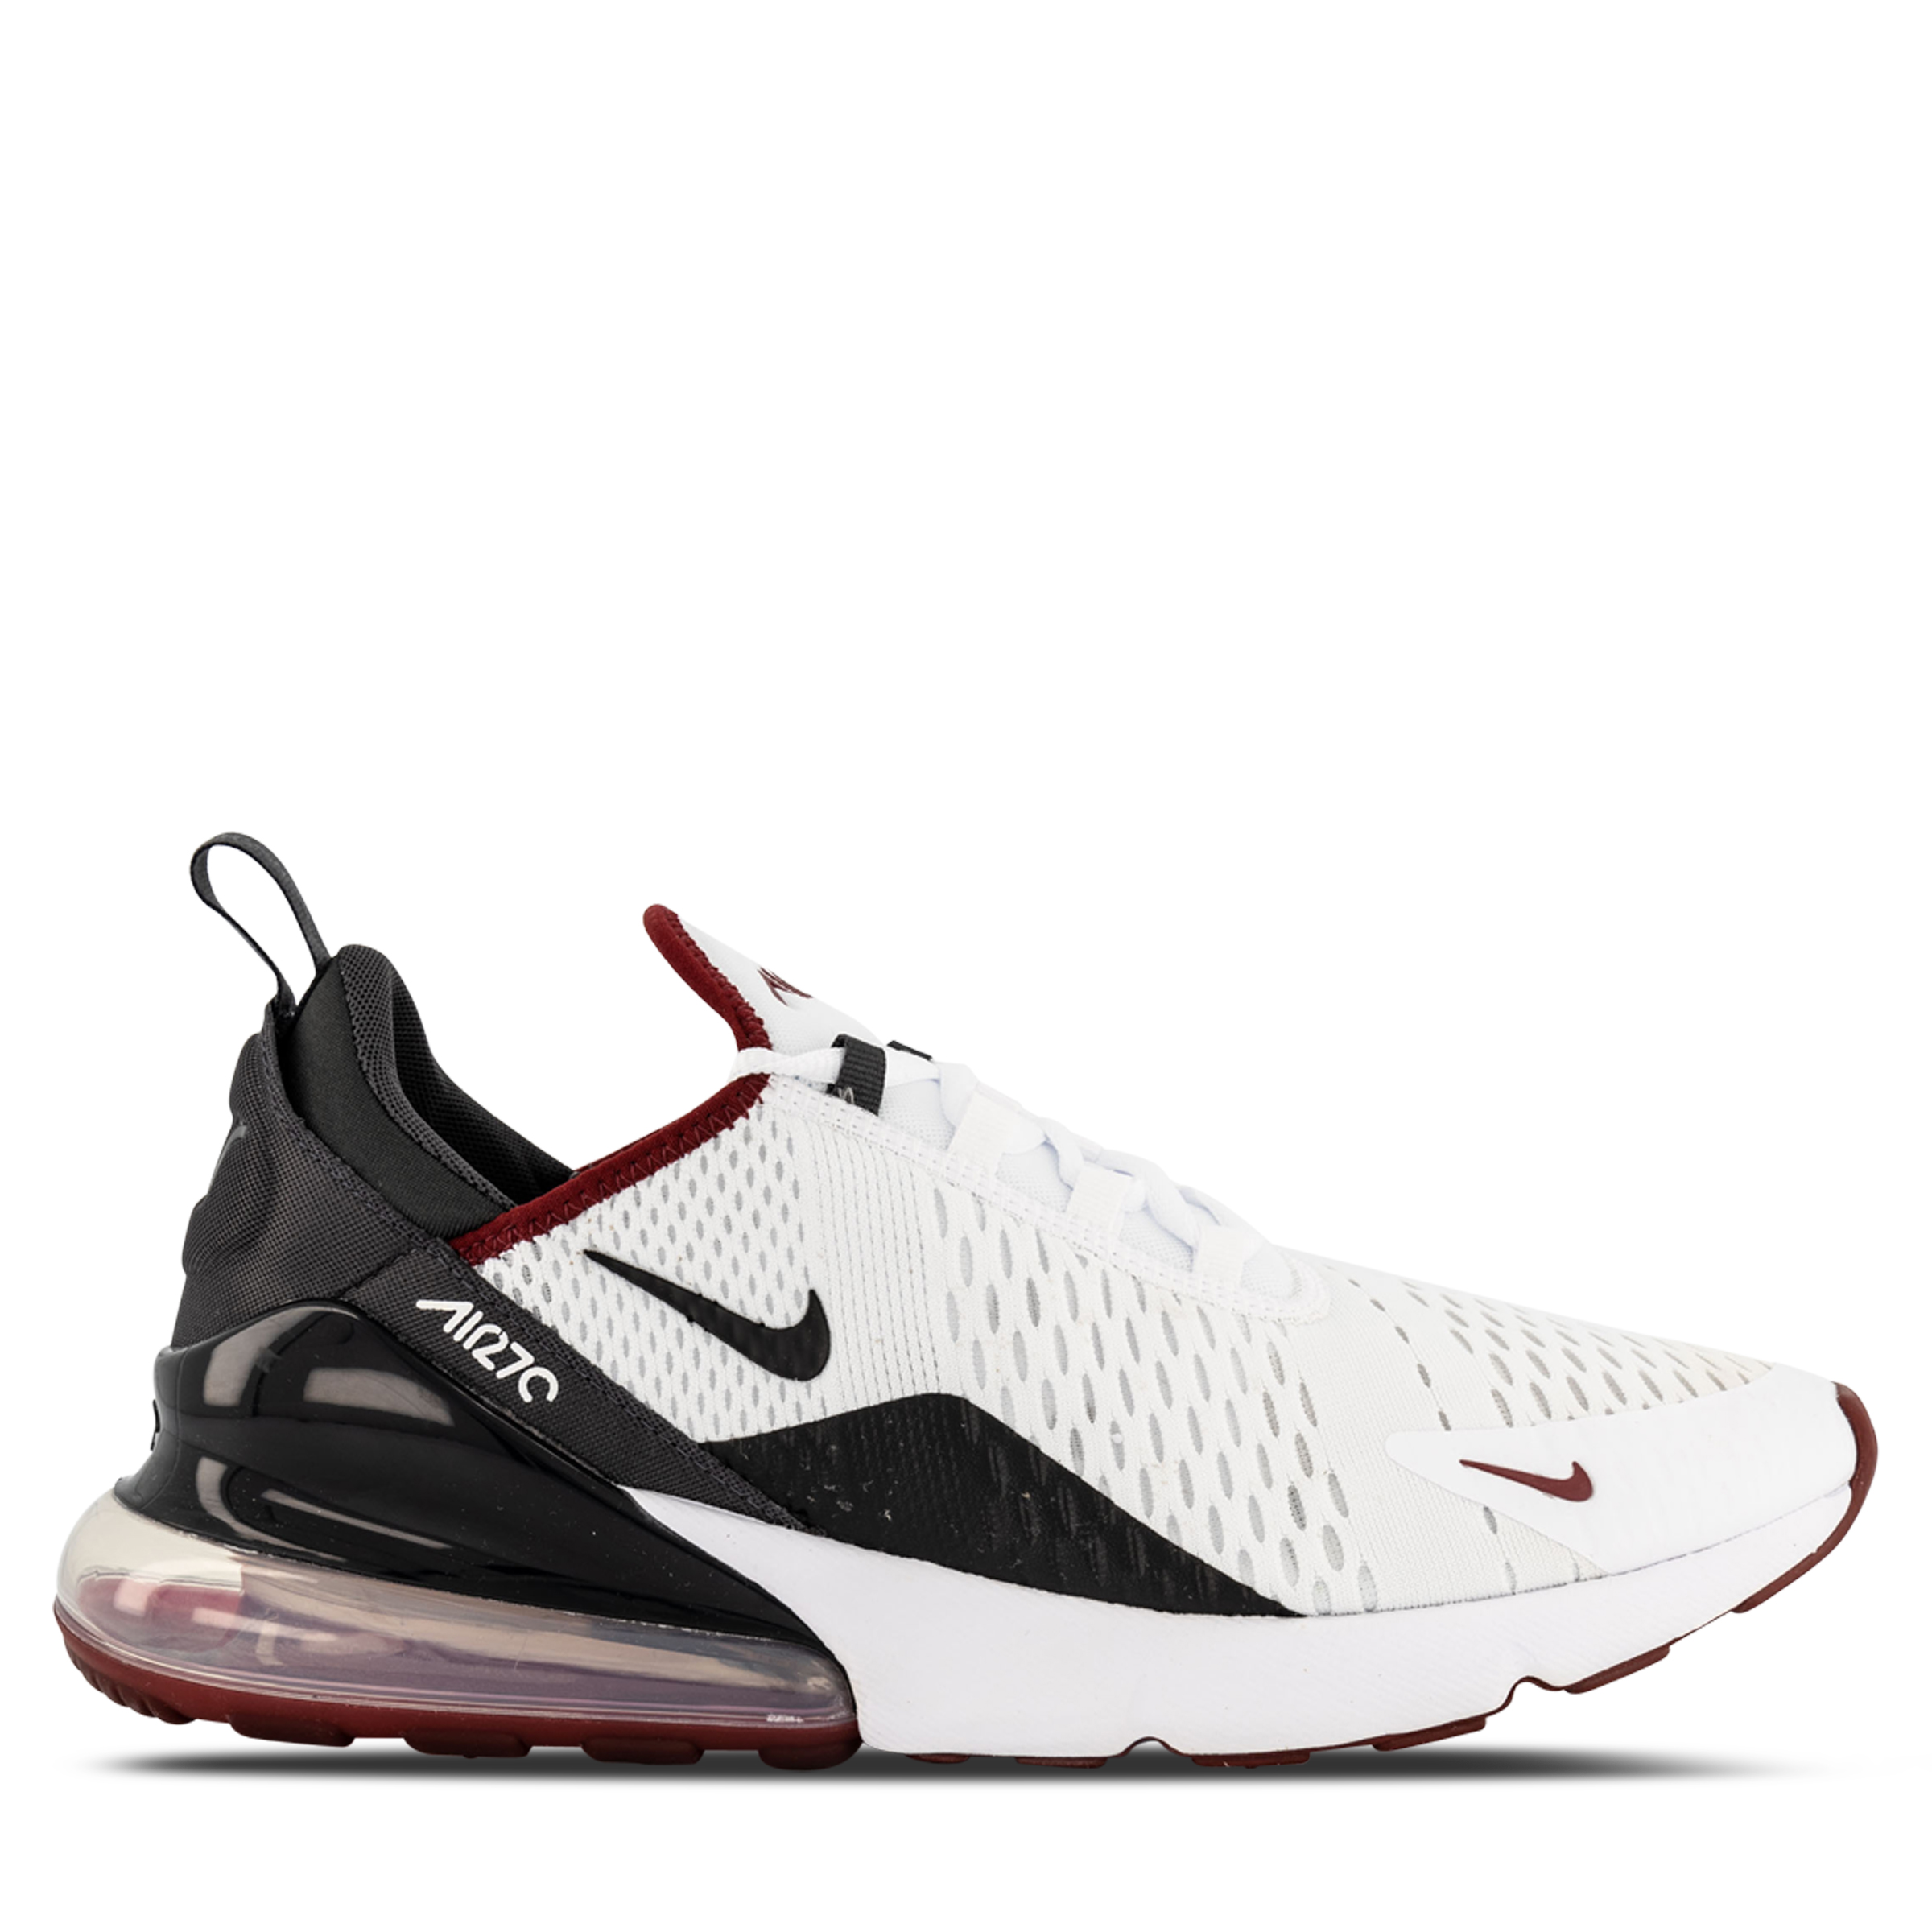 Antipoison Daddy put off Nike Air Max 270 White/Black/Anthracite | Hype DC